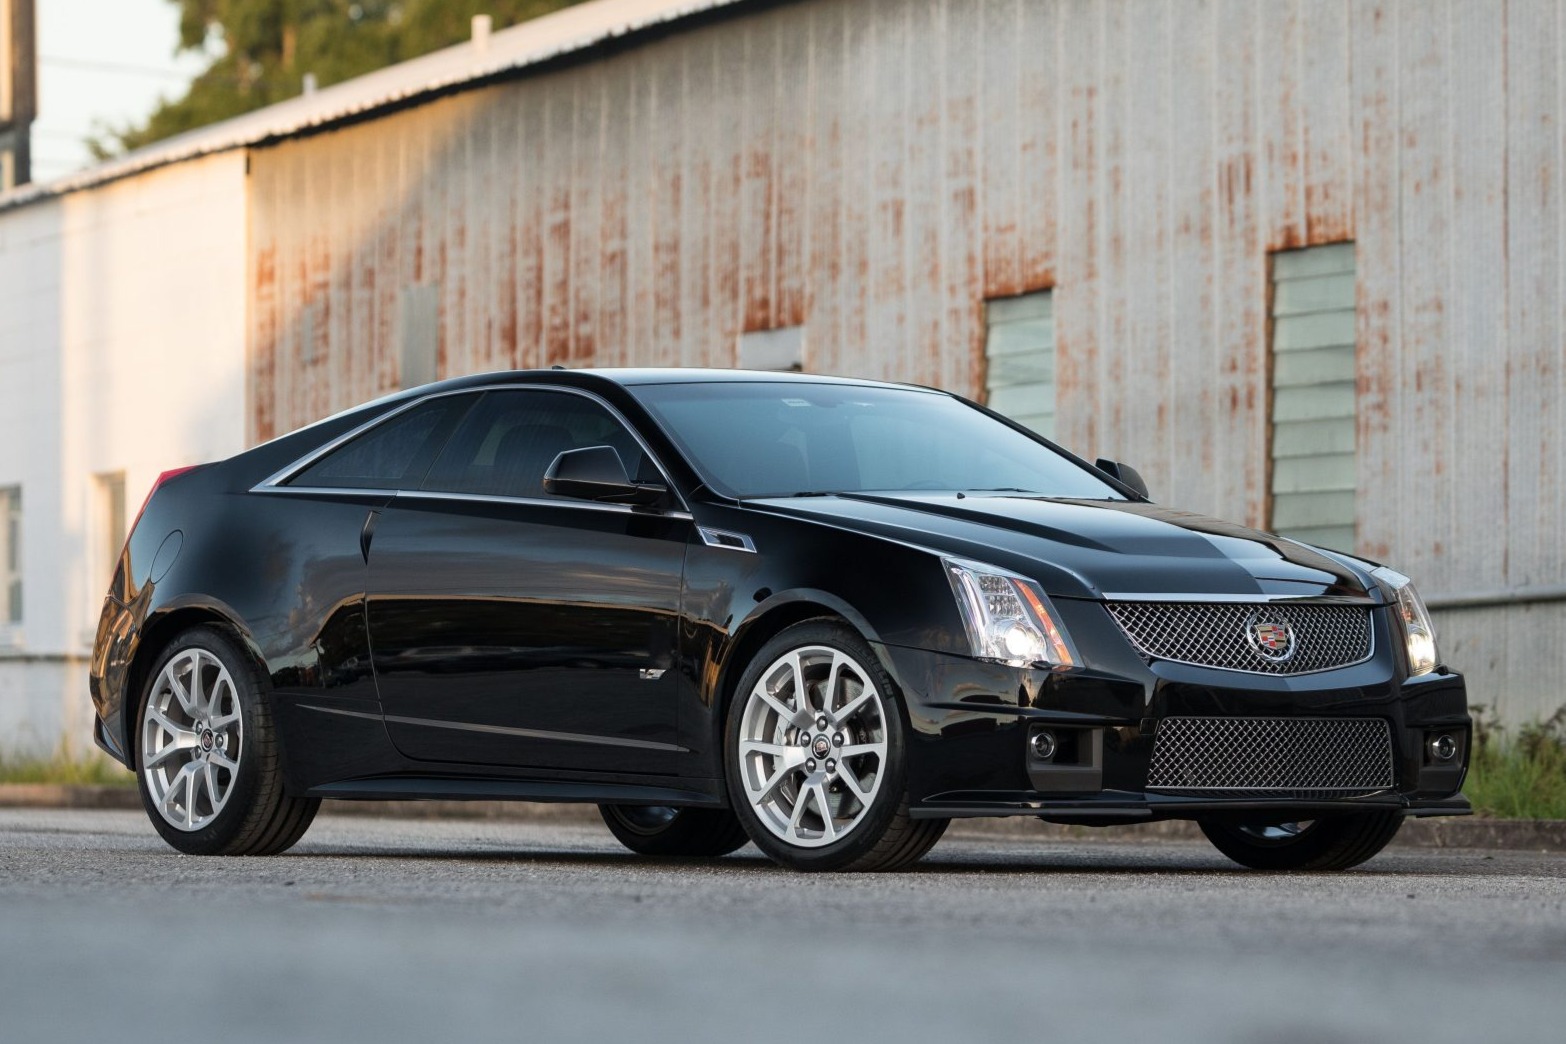 39k-Mile 2013 Cadillac CTS-V Coupe 6-Speed for sale on BaT Auctions -  closed on July 27, 2022 (Lot #79,756) | Bring a Trailer